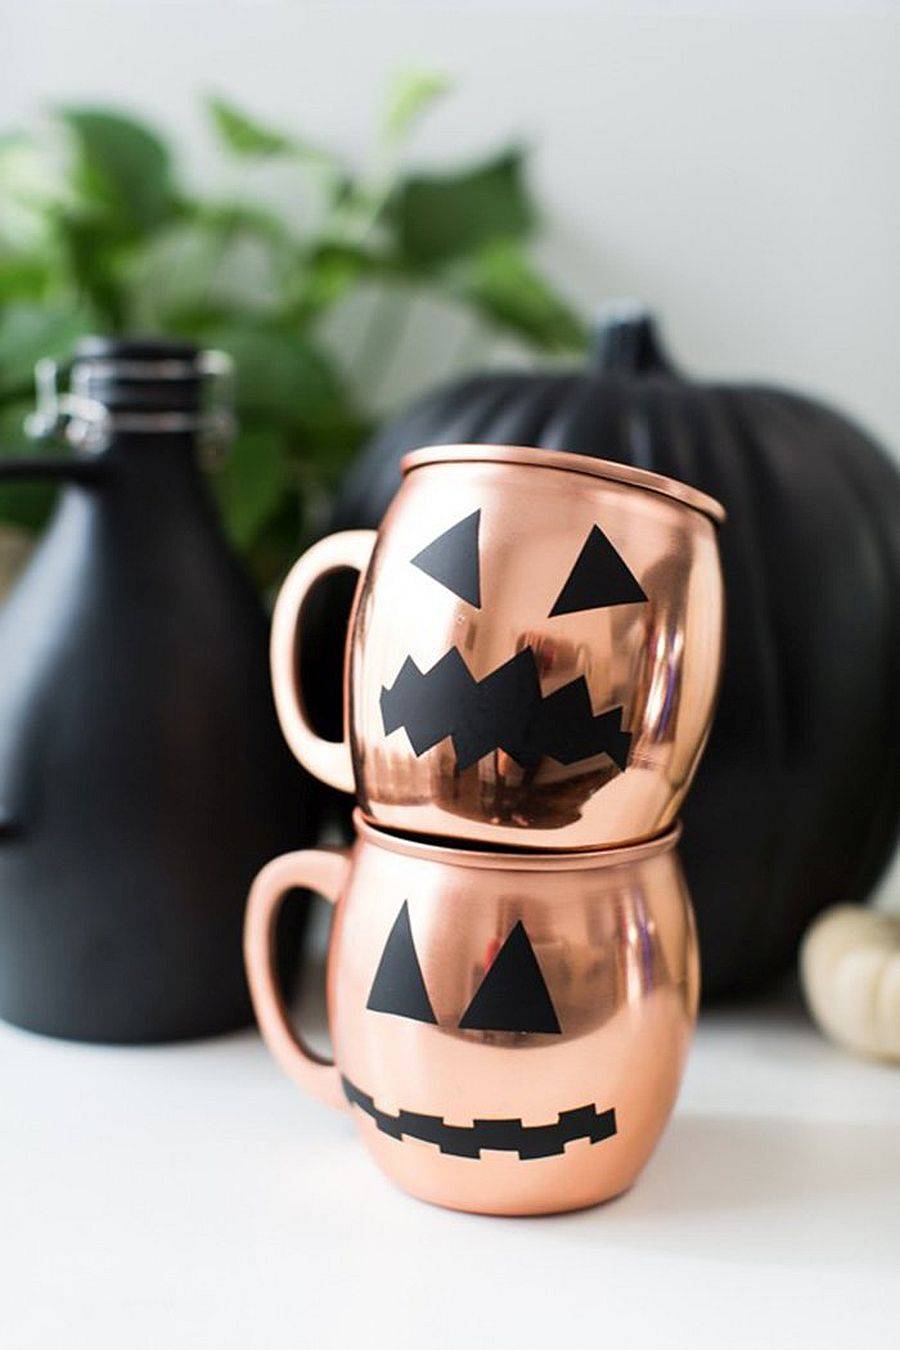 DIY-Halloween-glassware-decals-offer-an-easy-last-minute-decorating-idea-83034